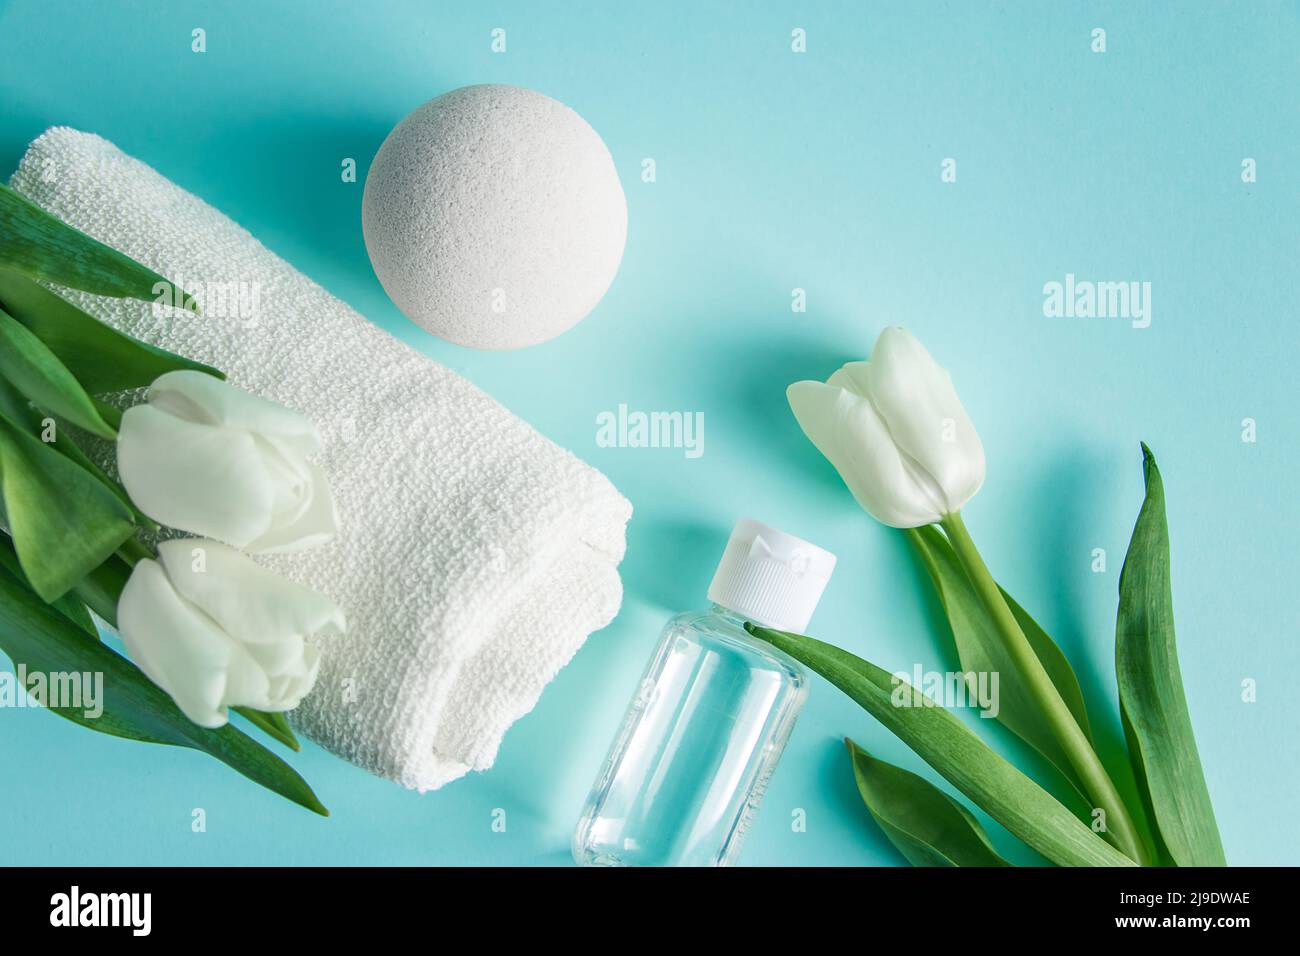 Skin care products on a blue background. Natural cosmetics and white tulips. Place for text. Stock Photo